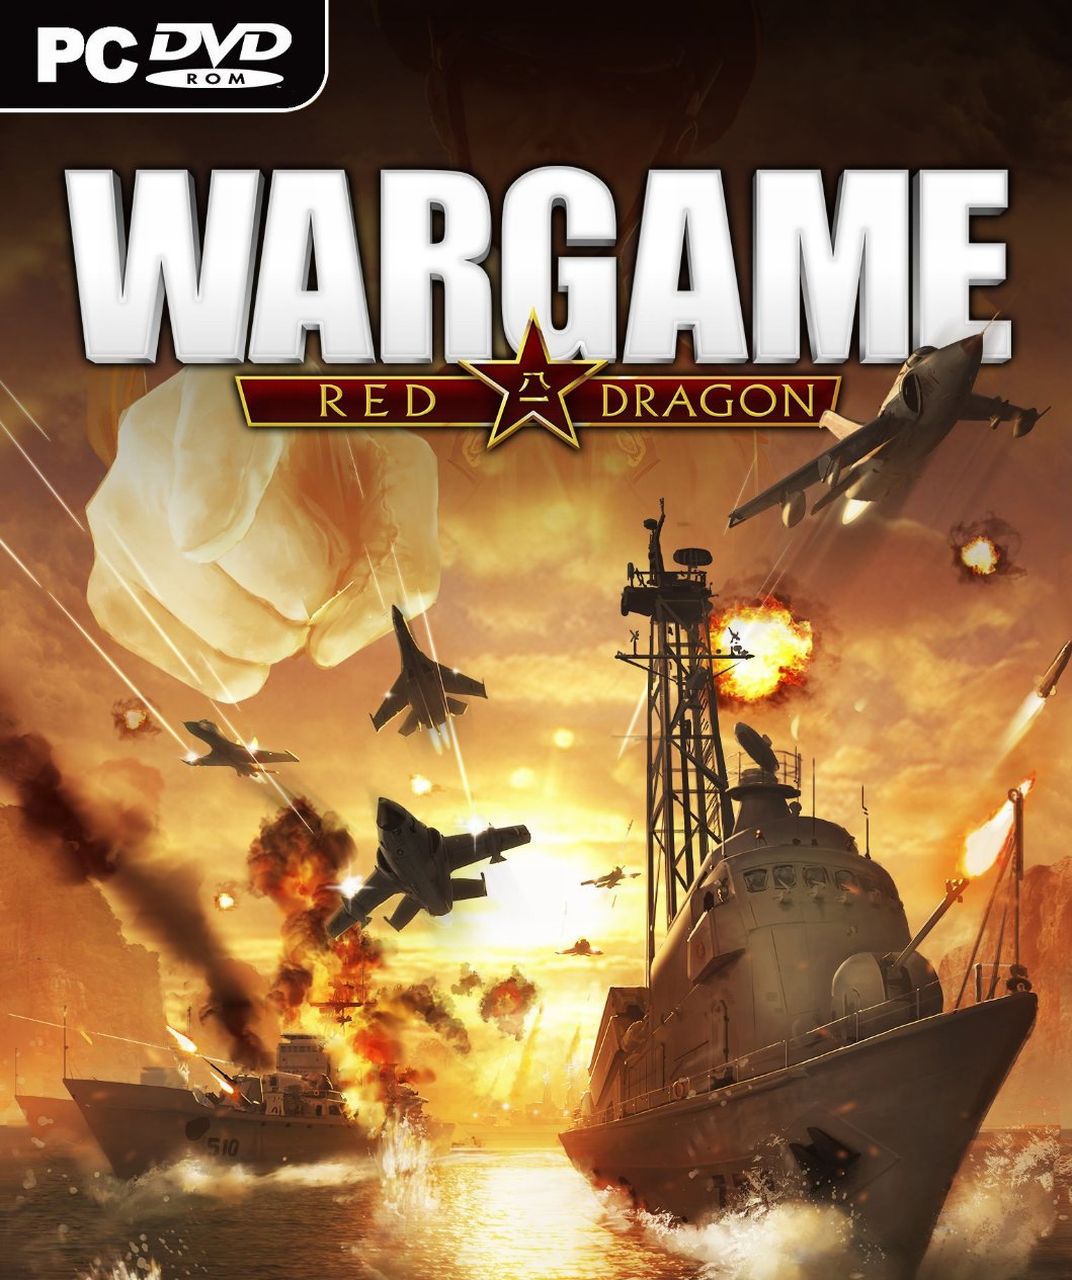 wargame red dragon coop campaign 2015